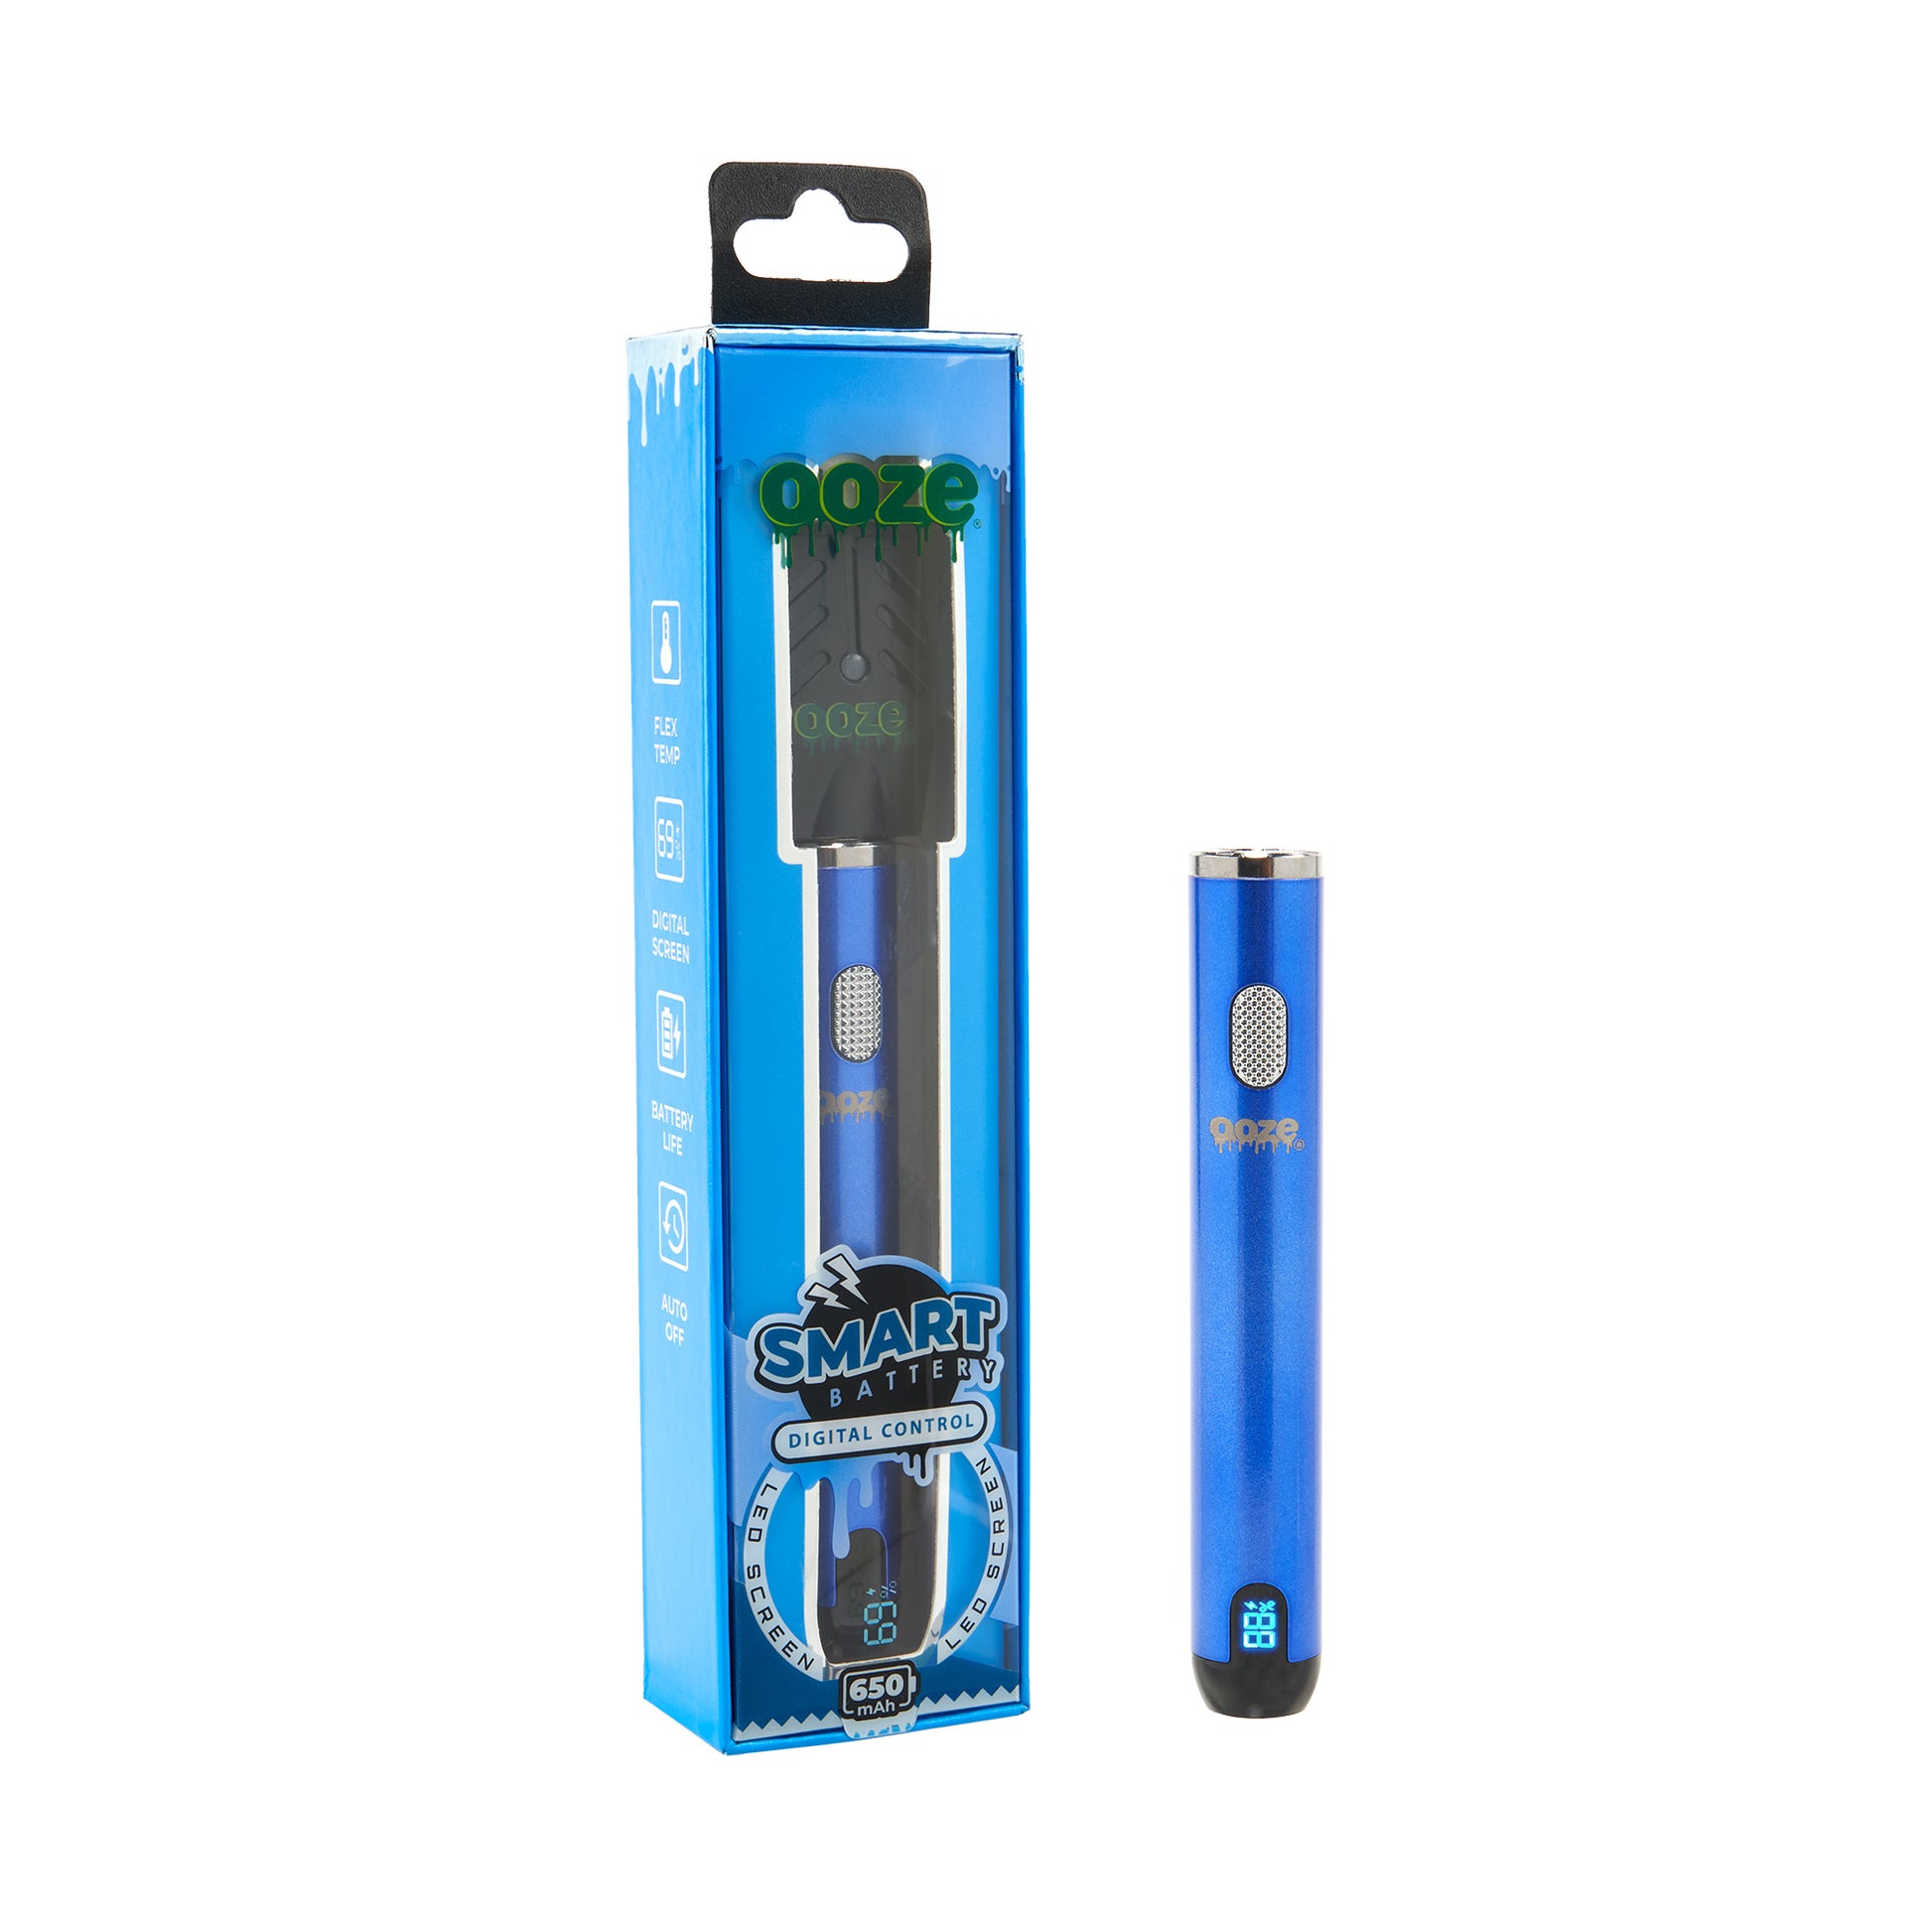 The sapphire blue Ooze Smart Battery is upright and turned on next to the package